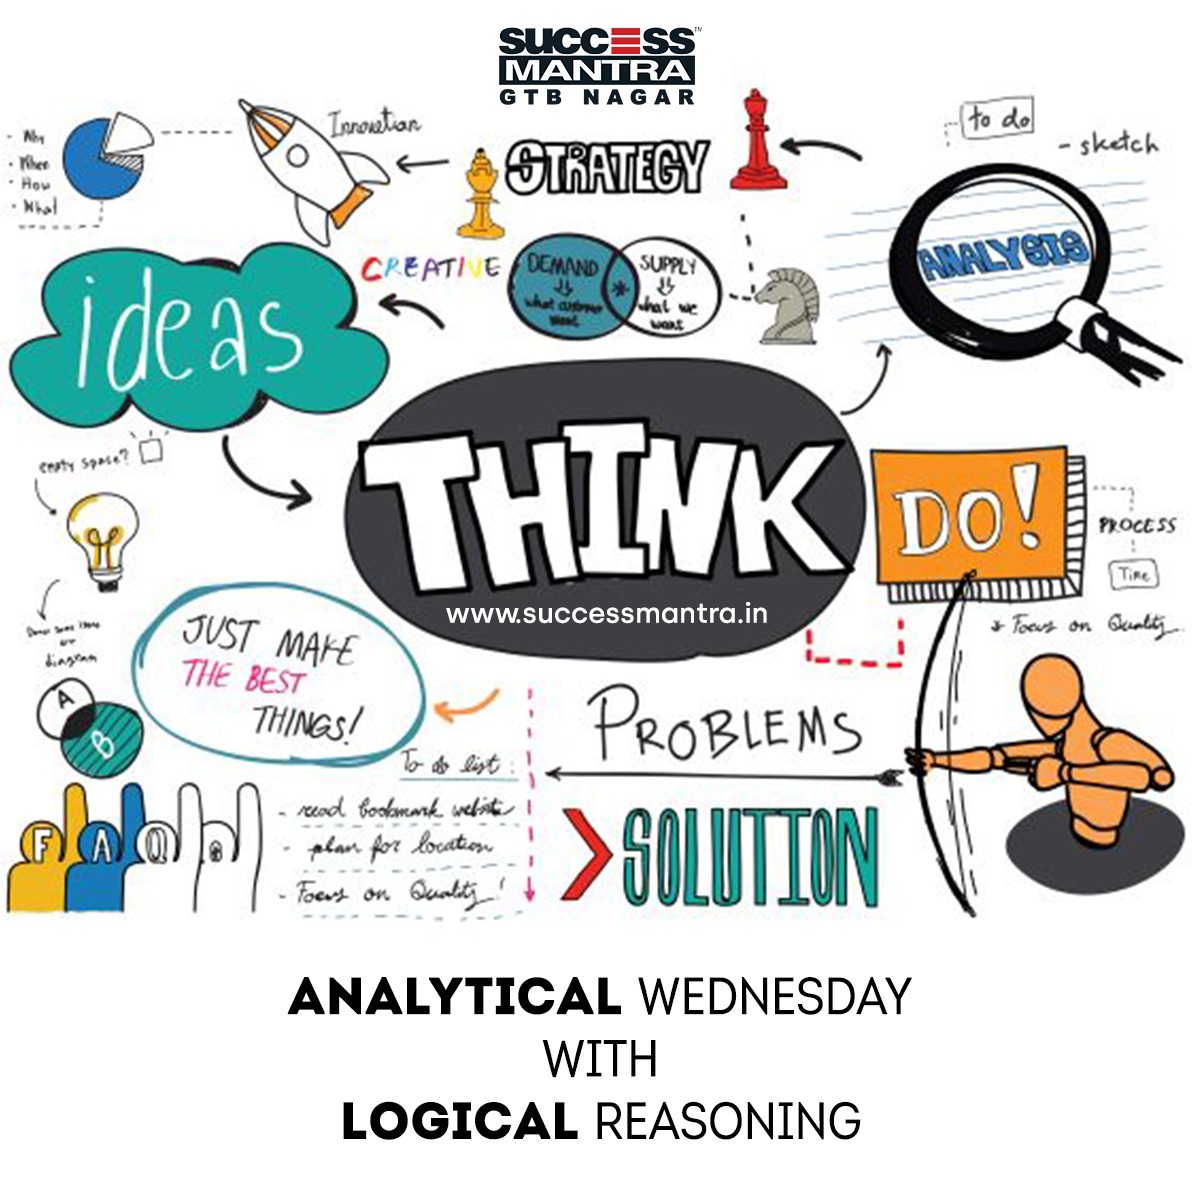 Questions on Logical Reasoning SMLRQ033